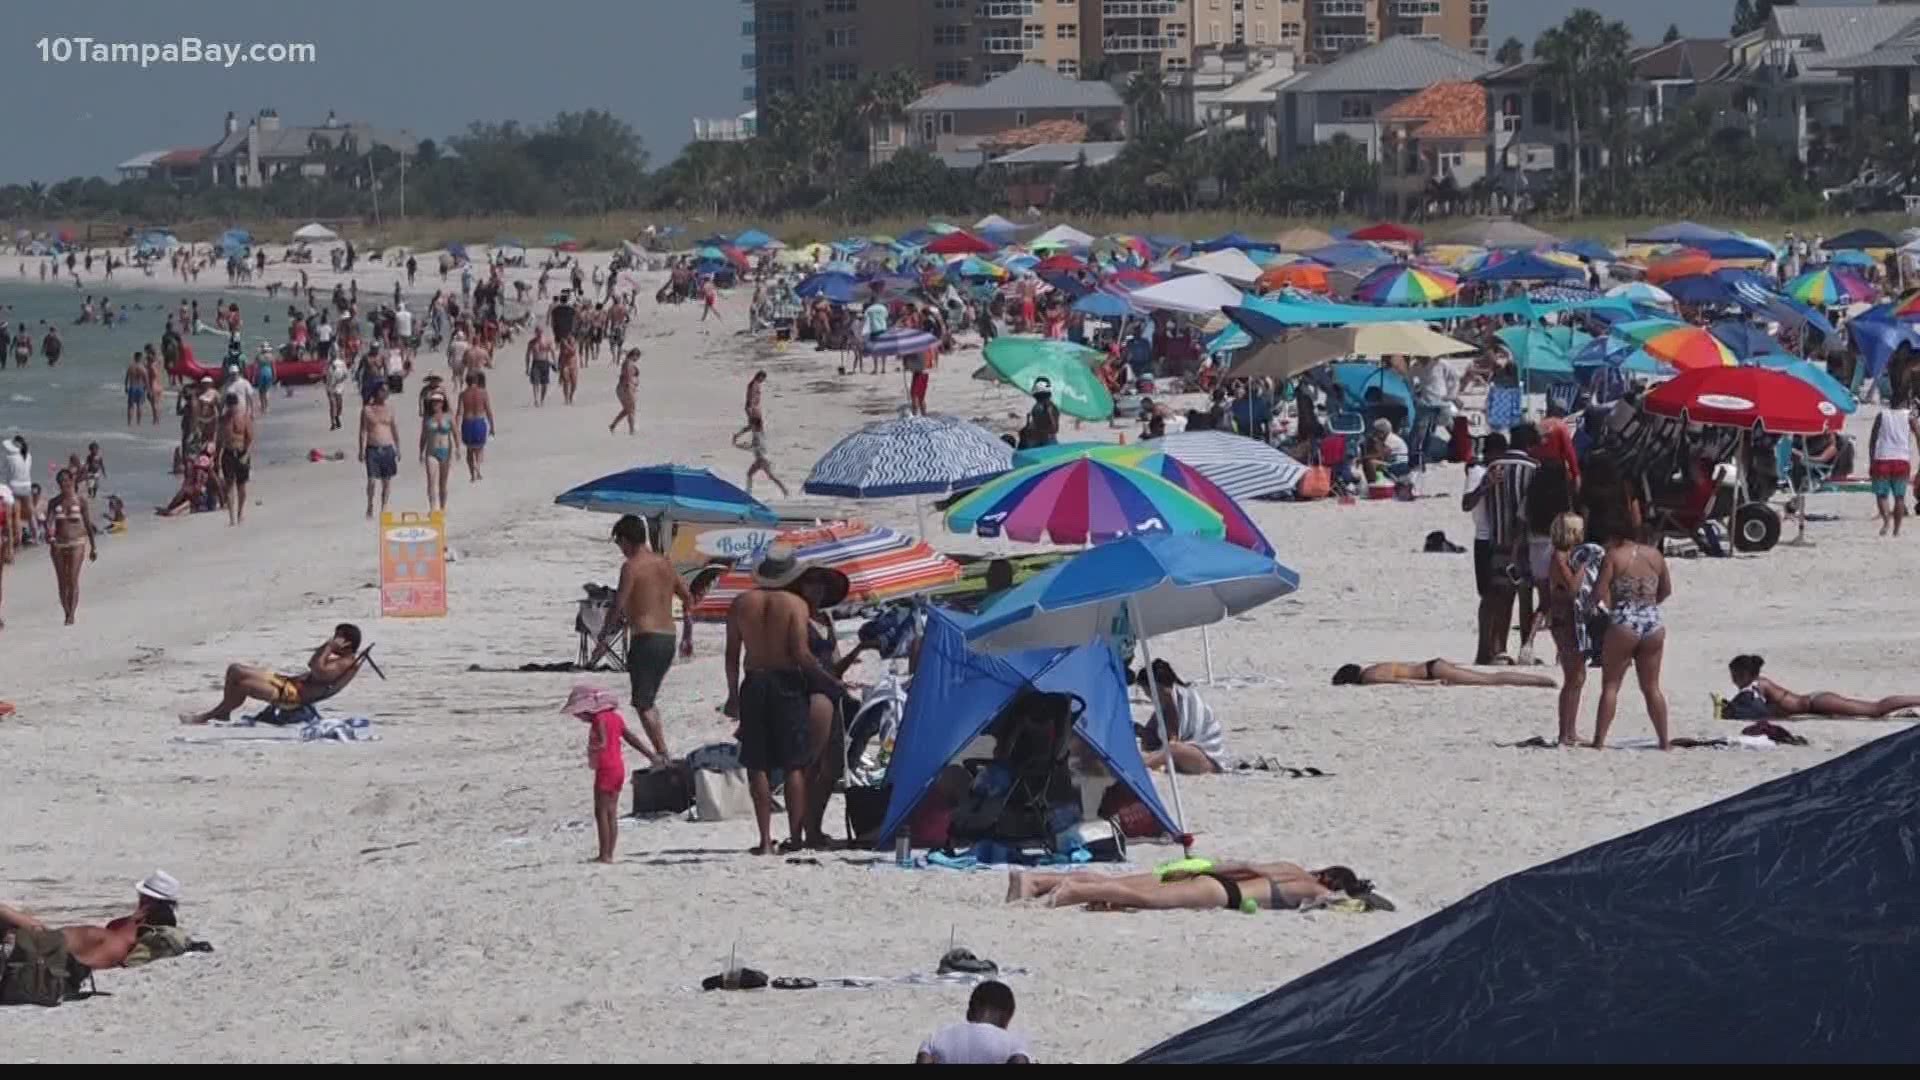 Thousands of people crowded Tampa Bay area beaches on Labor Day.